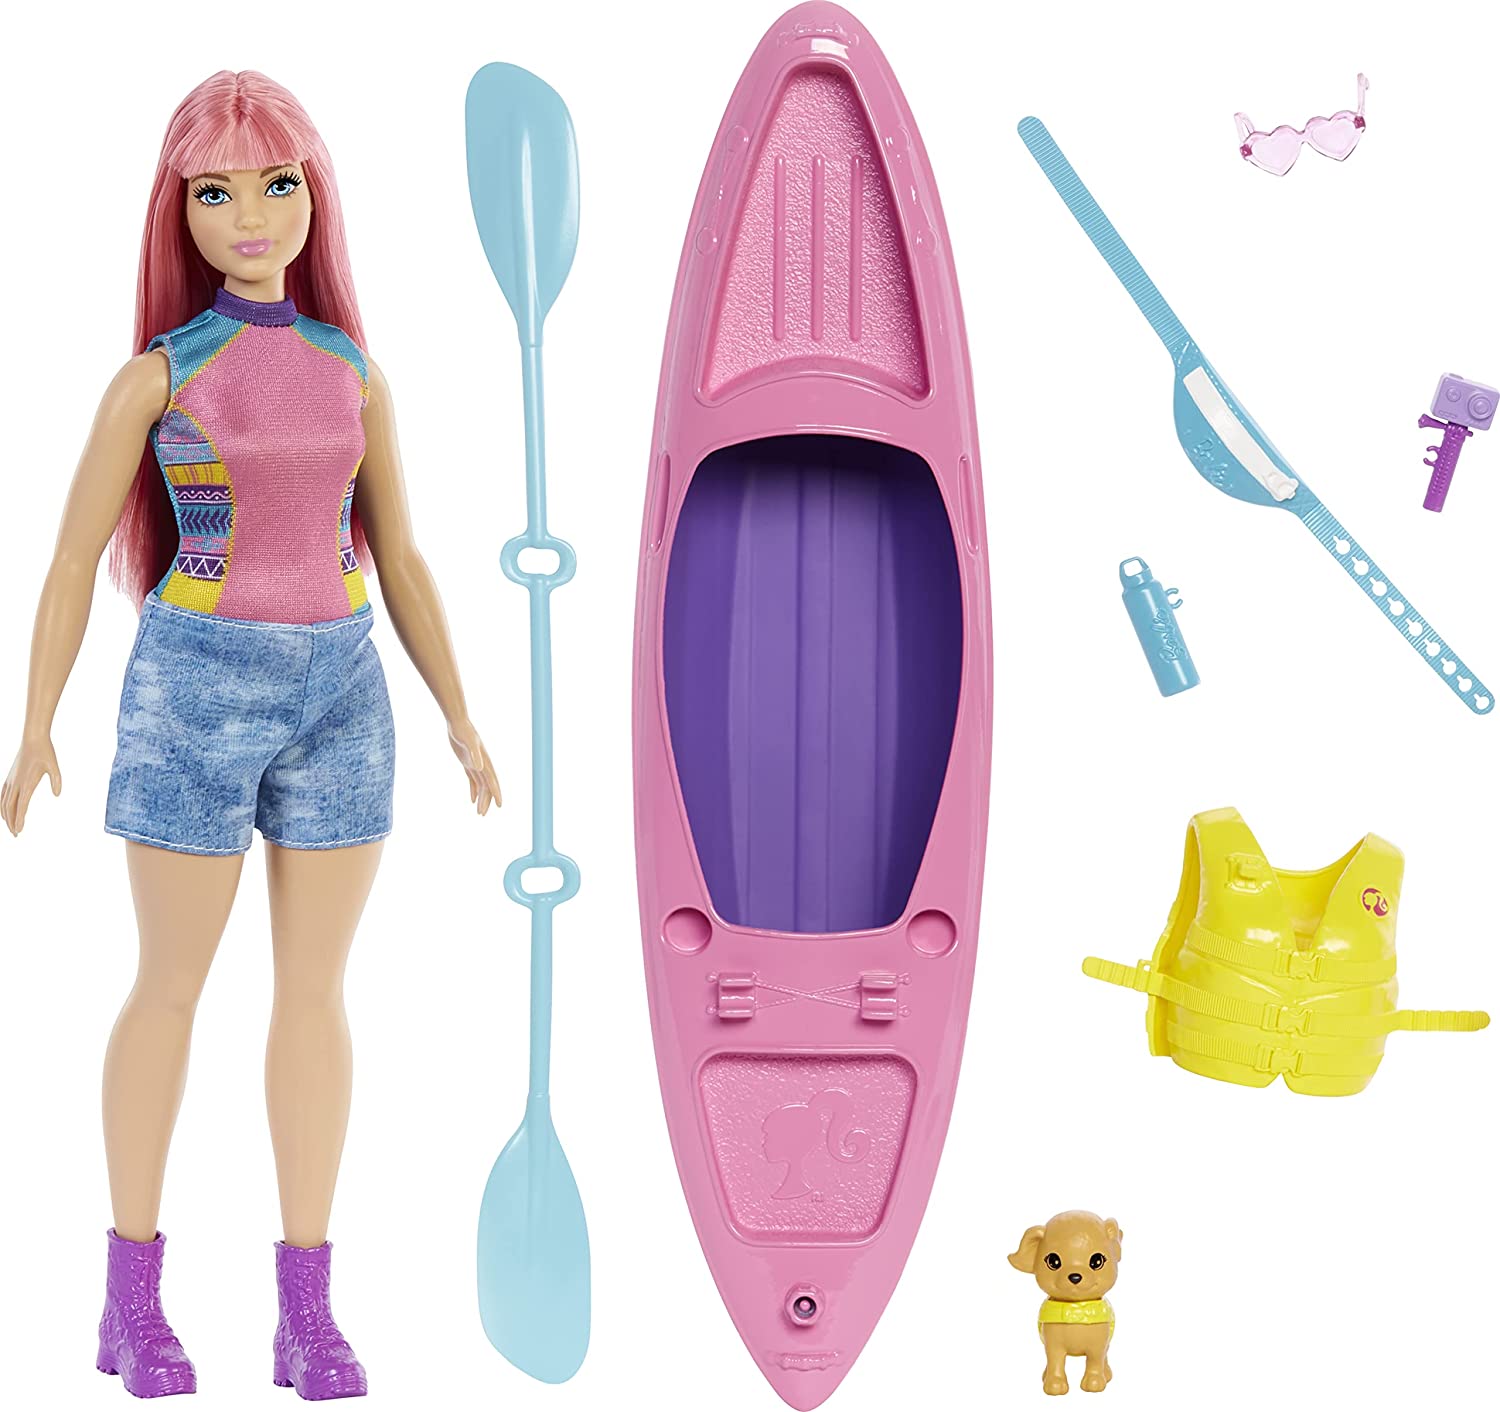 https://static.wikia.nocookie.net/barbie/images/7/7a/It_Takes_Two_Daisy_Doll_and_Accessories_01.jpg/revision/latest?cb=20220202230958